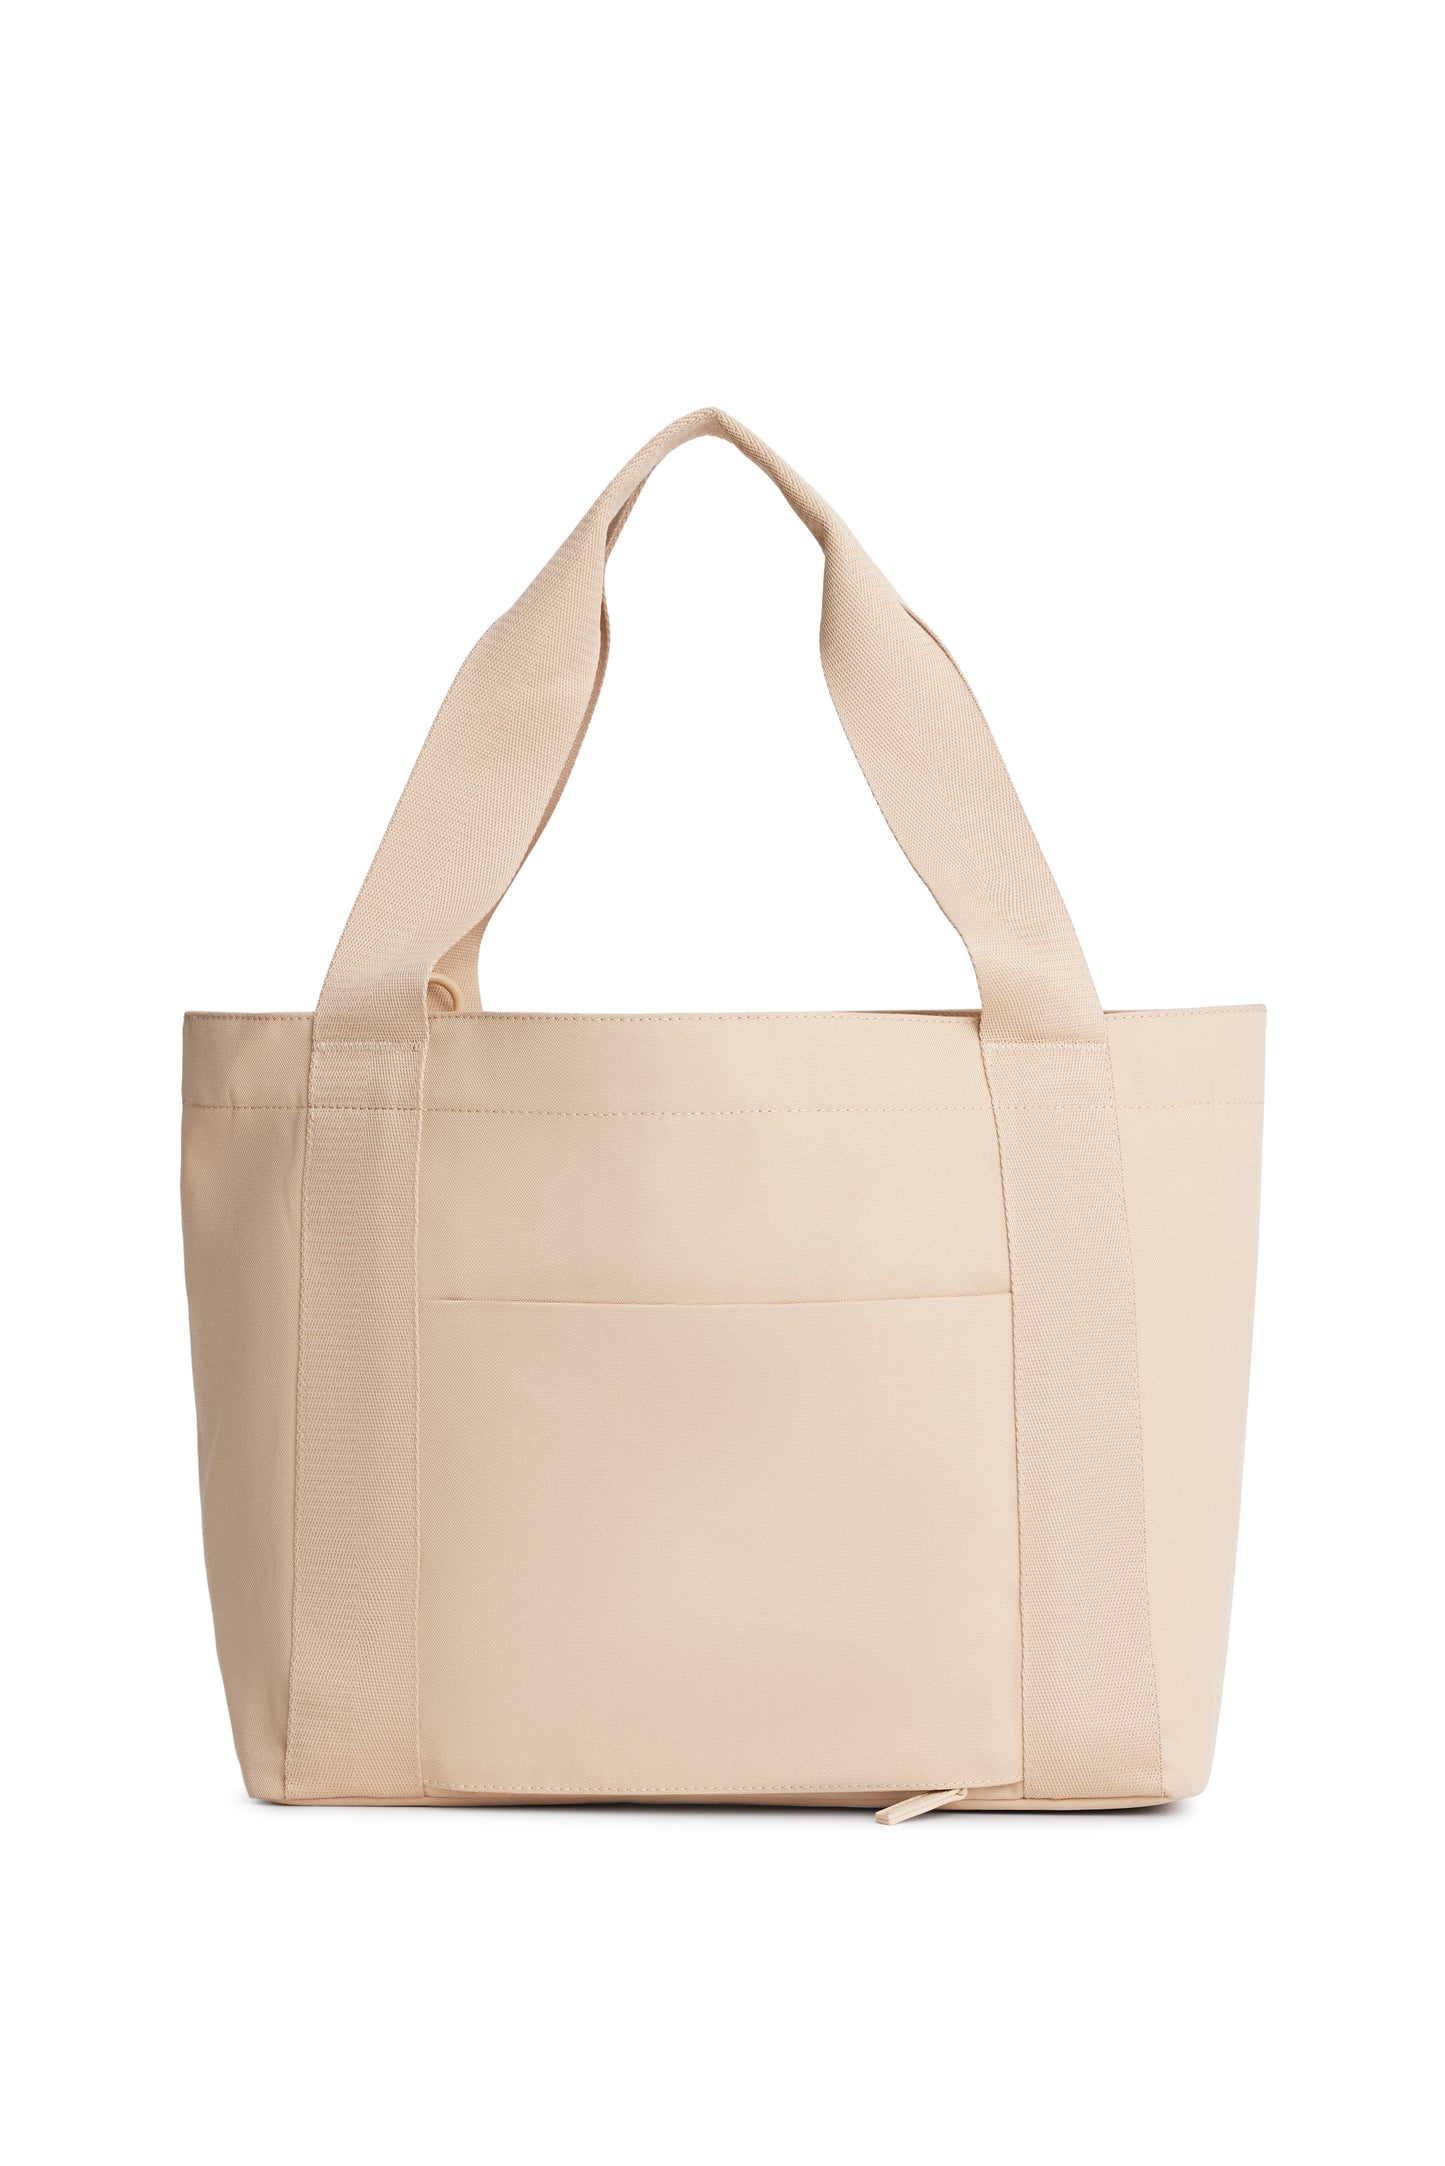 The BÉISics Tote in Beige